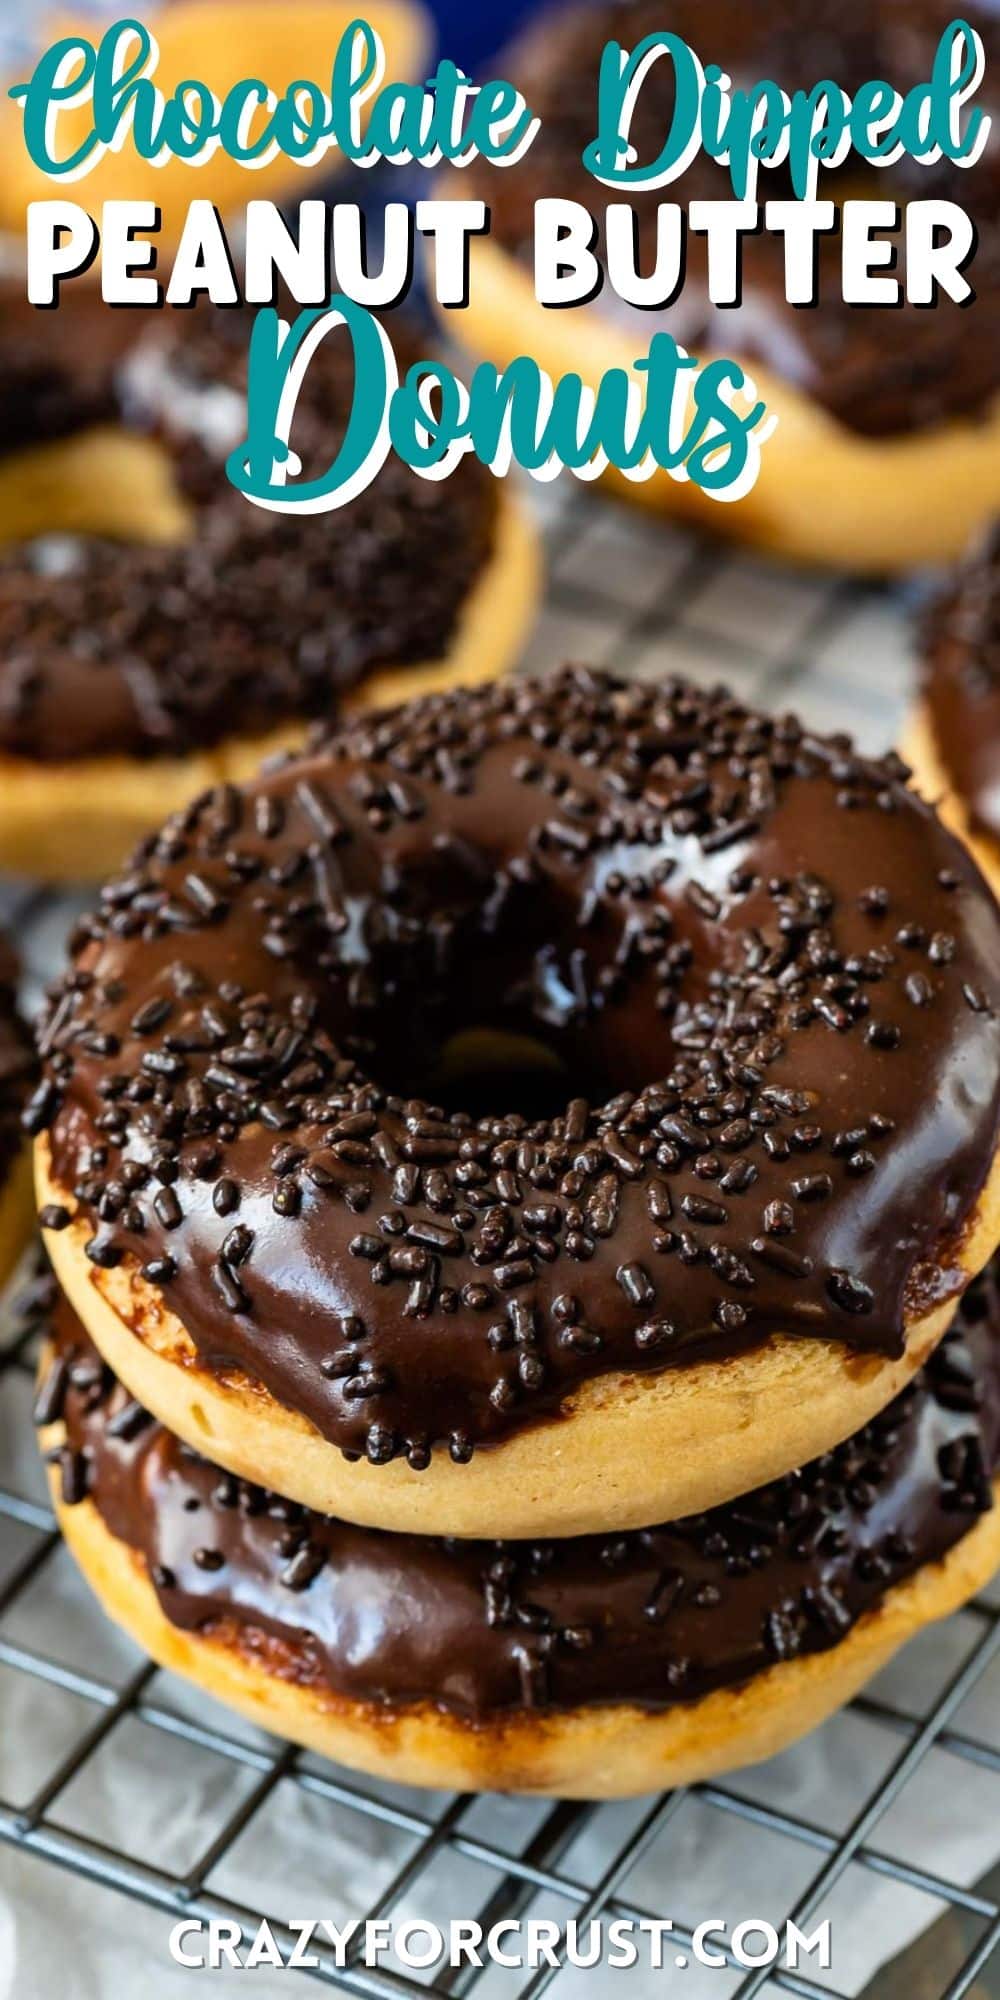 stacked peanut butter donut dipped in chocolate with chocolate sprinkles on top with words on the image